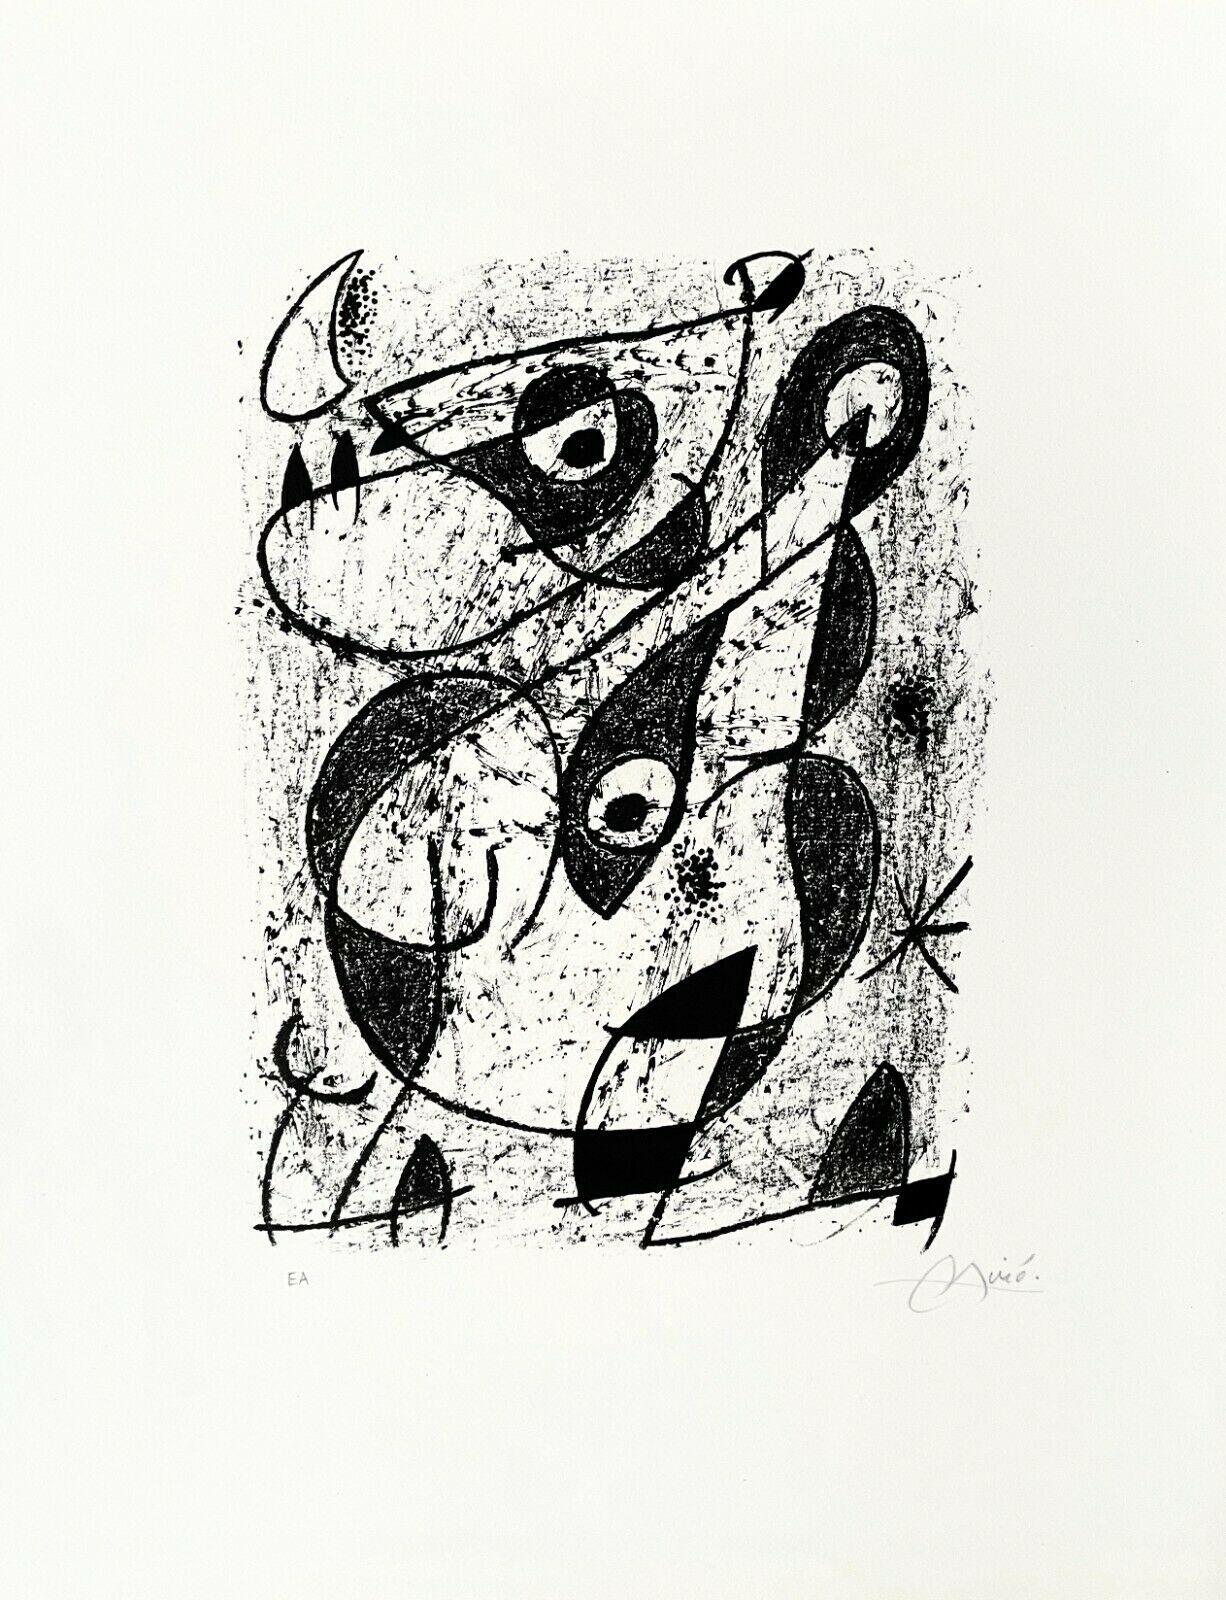 Artist: Joan Miro (1893-1983)
Title: a l’Encre (Cramer 161)
Year: 1972
Medium: Lithograph on Arches paper
Inscription: Signed in pencil and annotated 'E.A' (an épreuve d'artiste, aside from the primary edition)
Size: 22 x 17 inches
Condition: